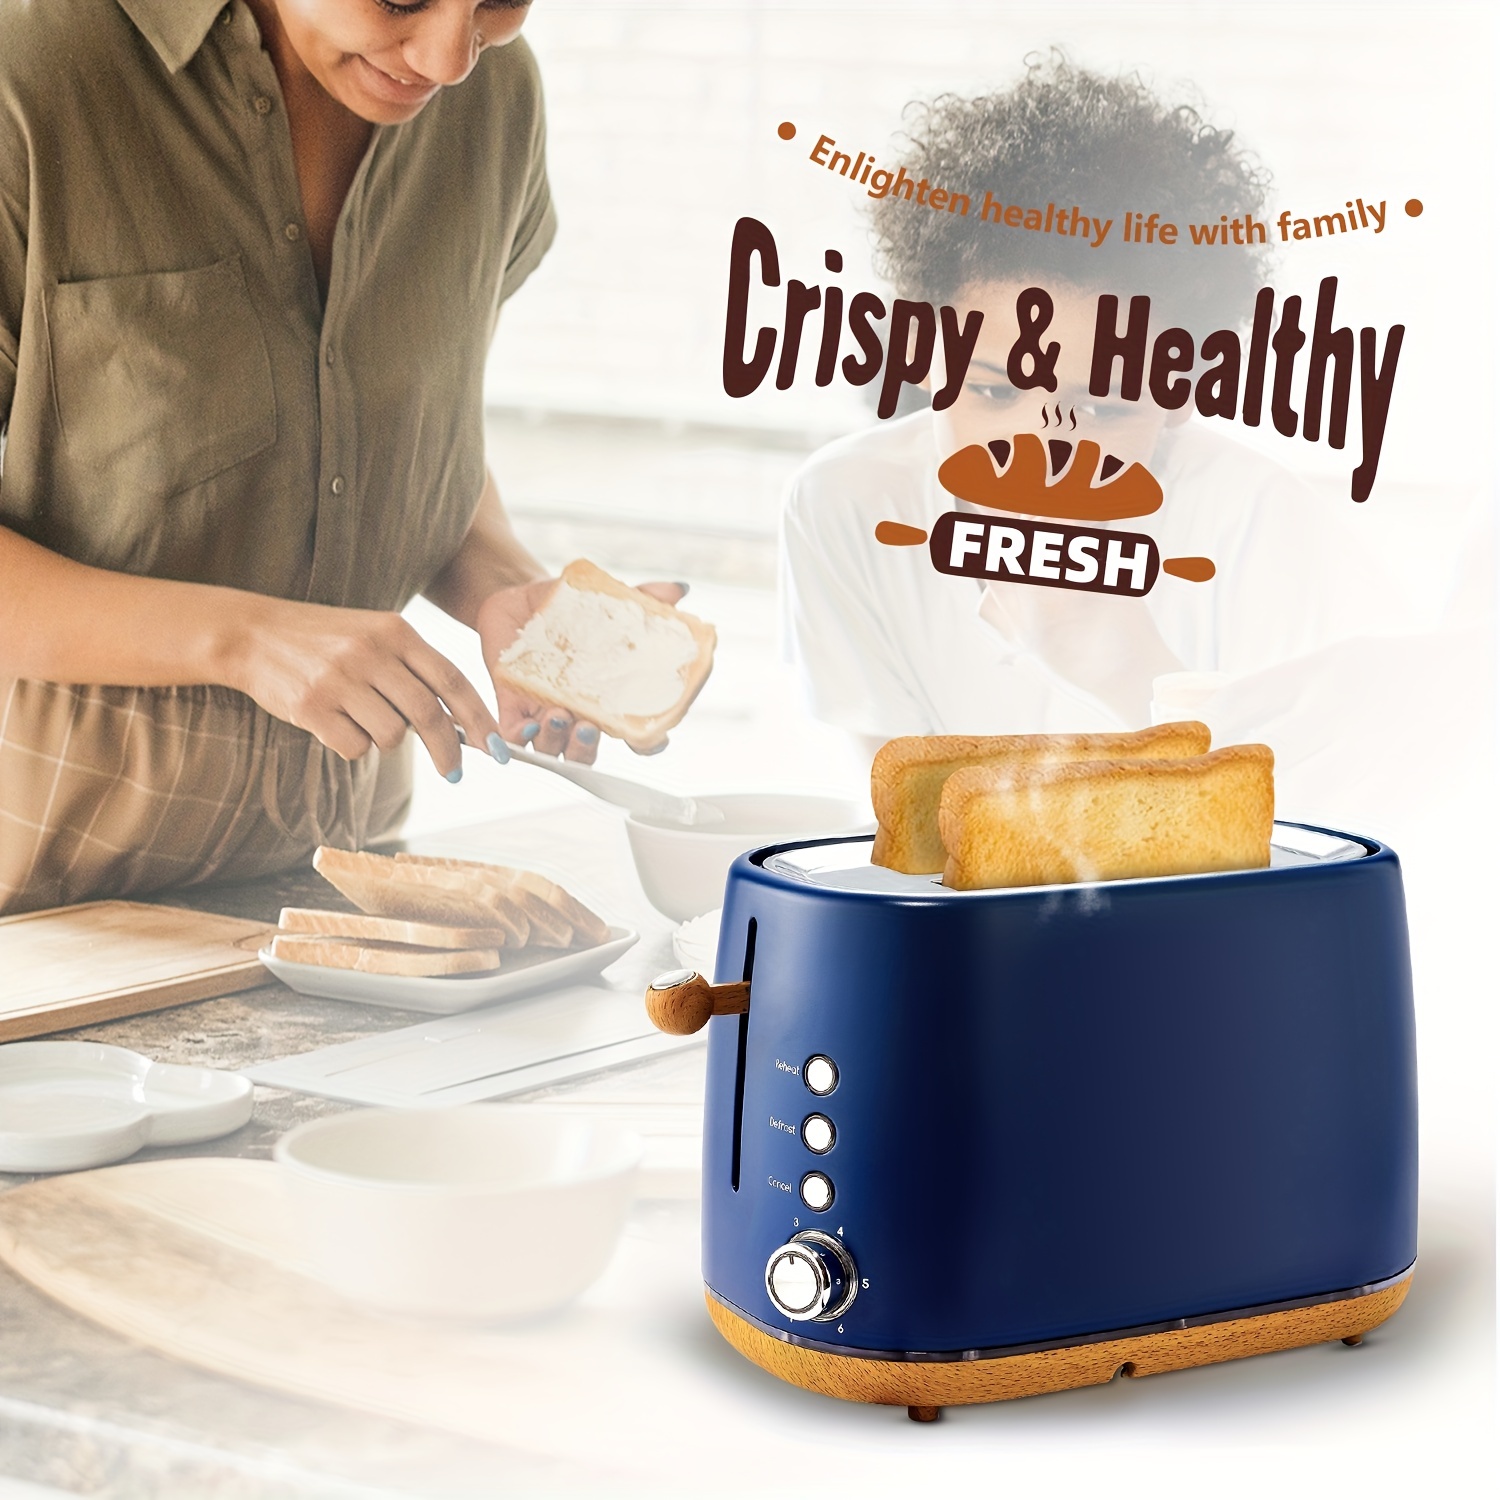 Whall Toasters 2 Slice Best Rated Prime, Stainless Steel,Bagel Toaster - 6 Bread Shade Settings,Bagel/Defrost/Cancel Function,1.5in Wide Slots